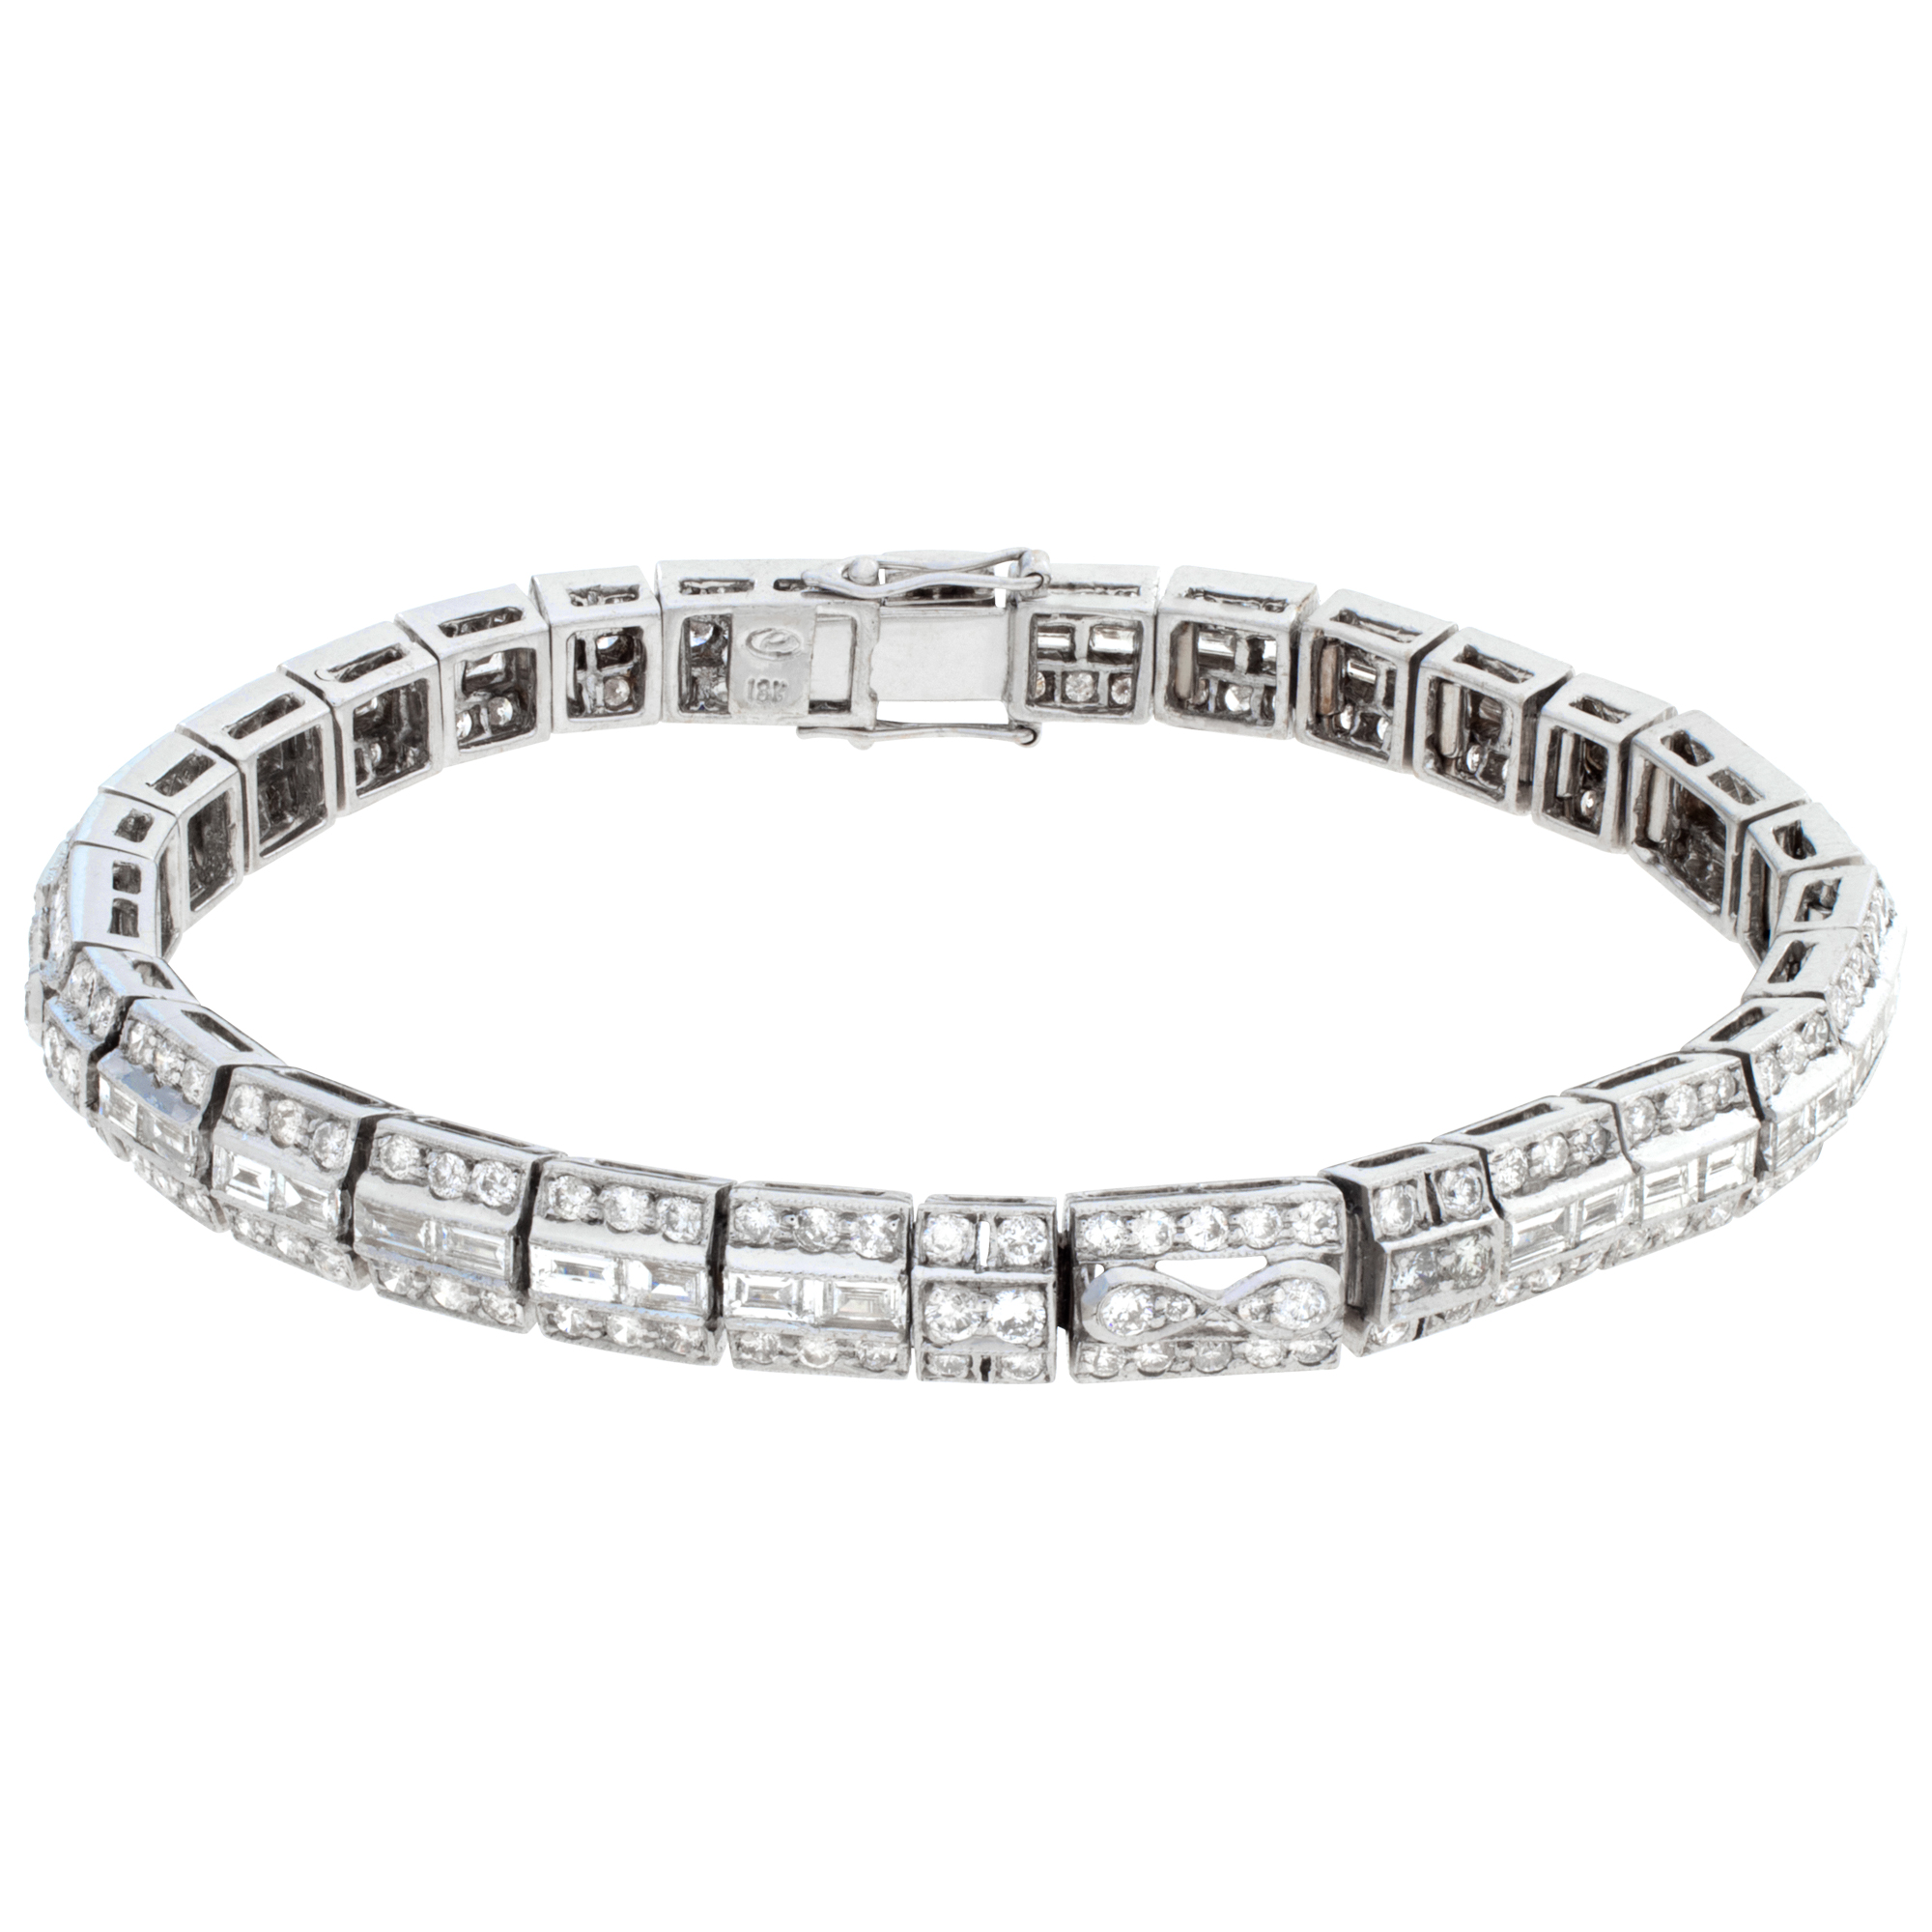 18k white gold diamond line bracele with 4.55 carats in round and emerald cut diamonds